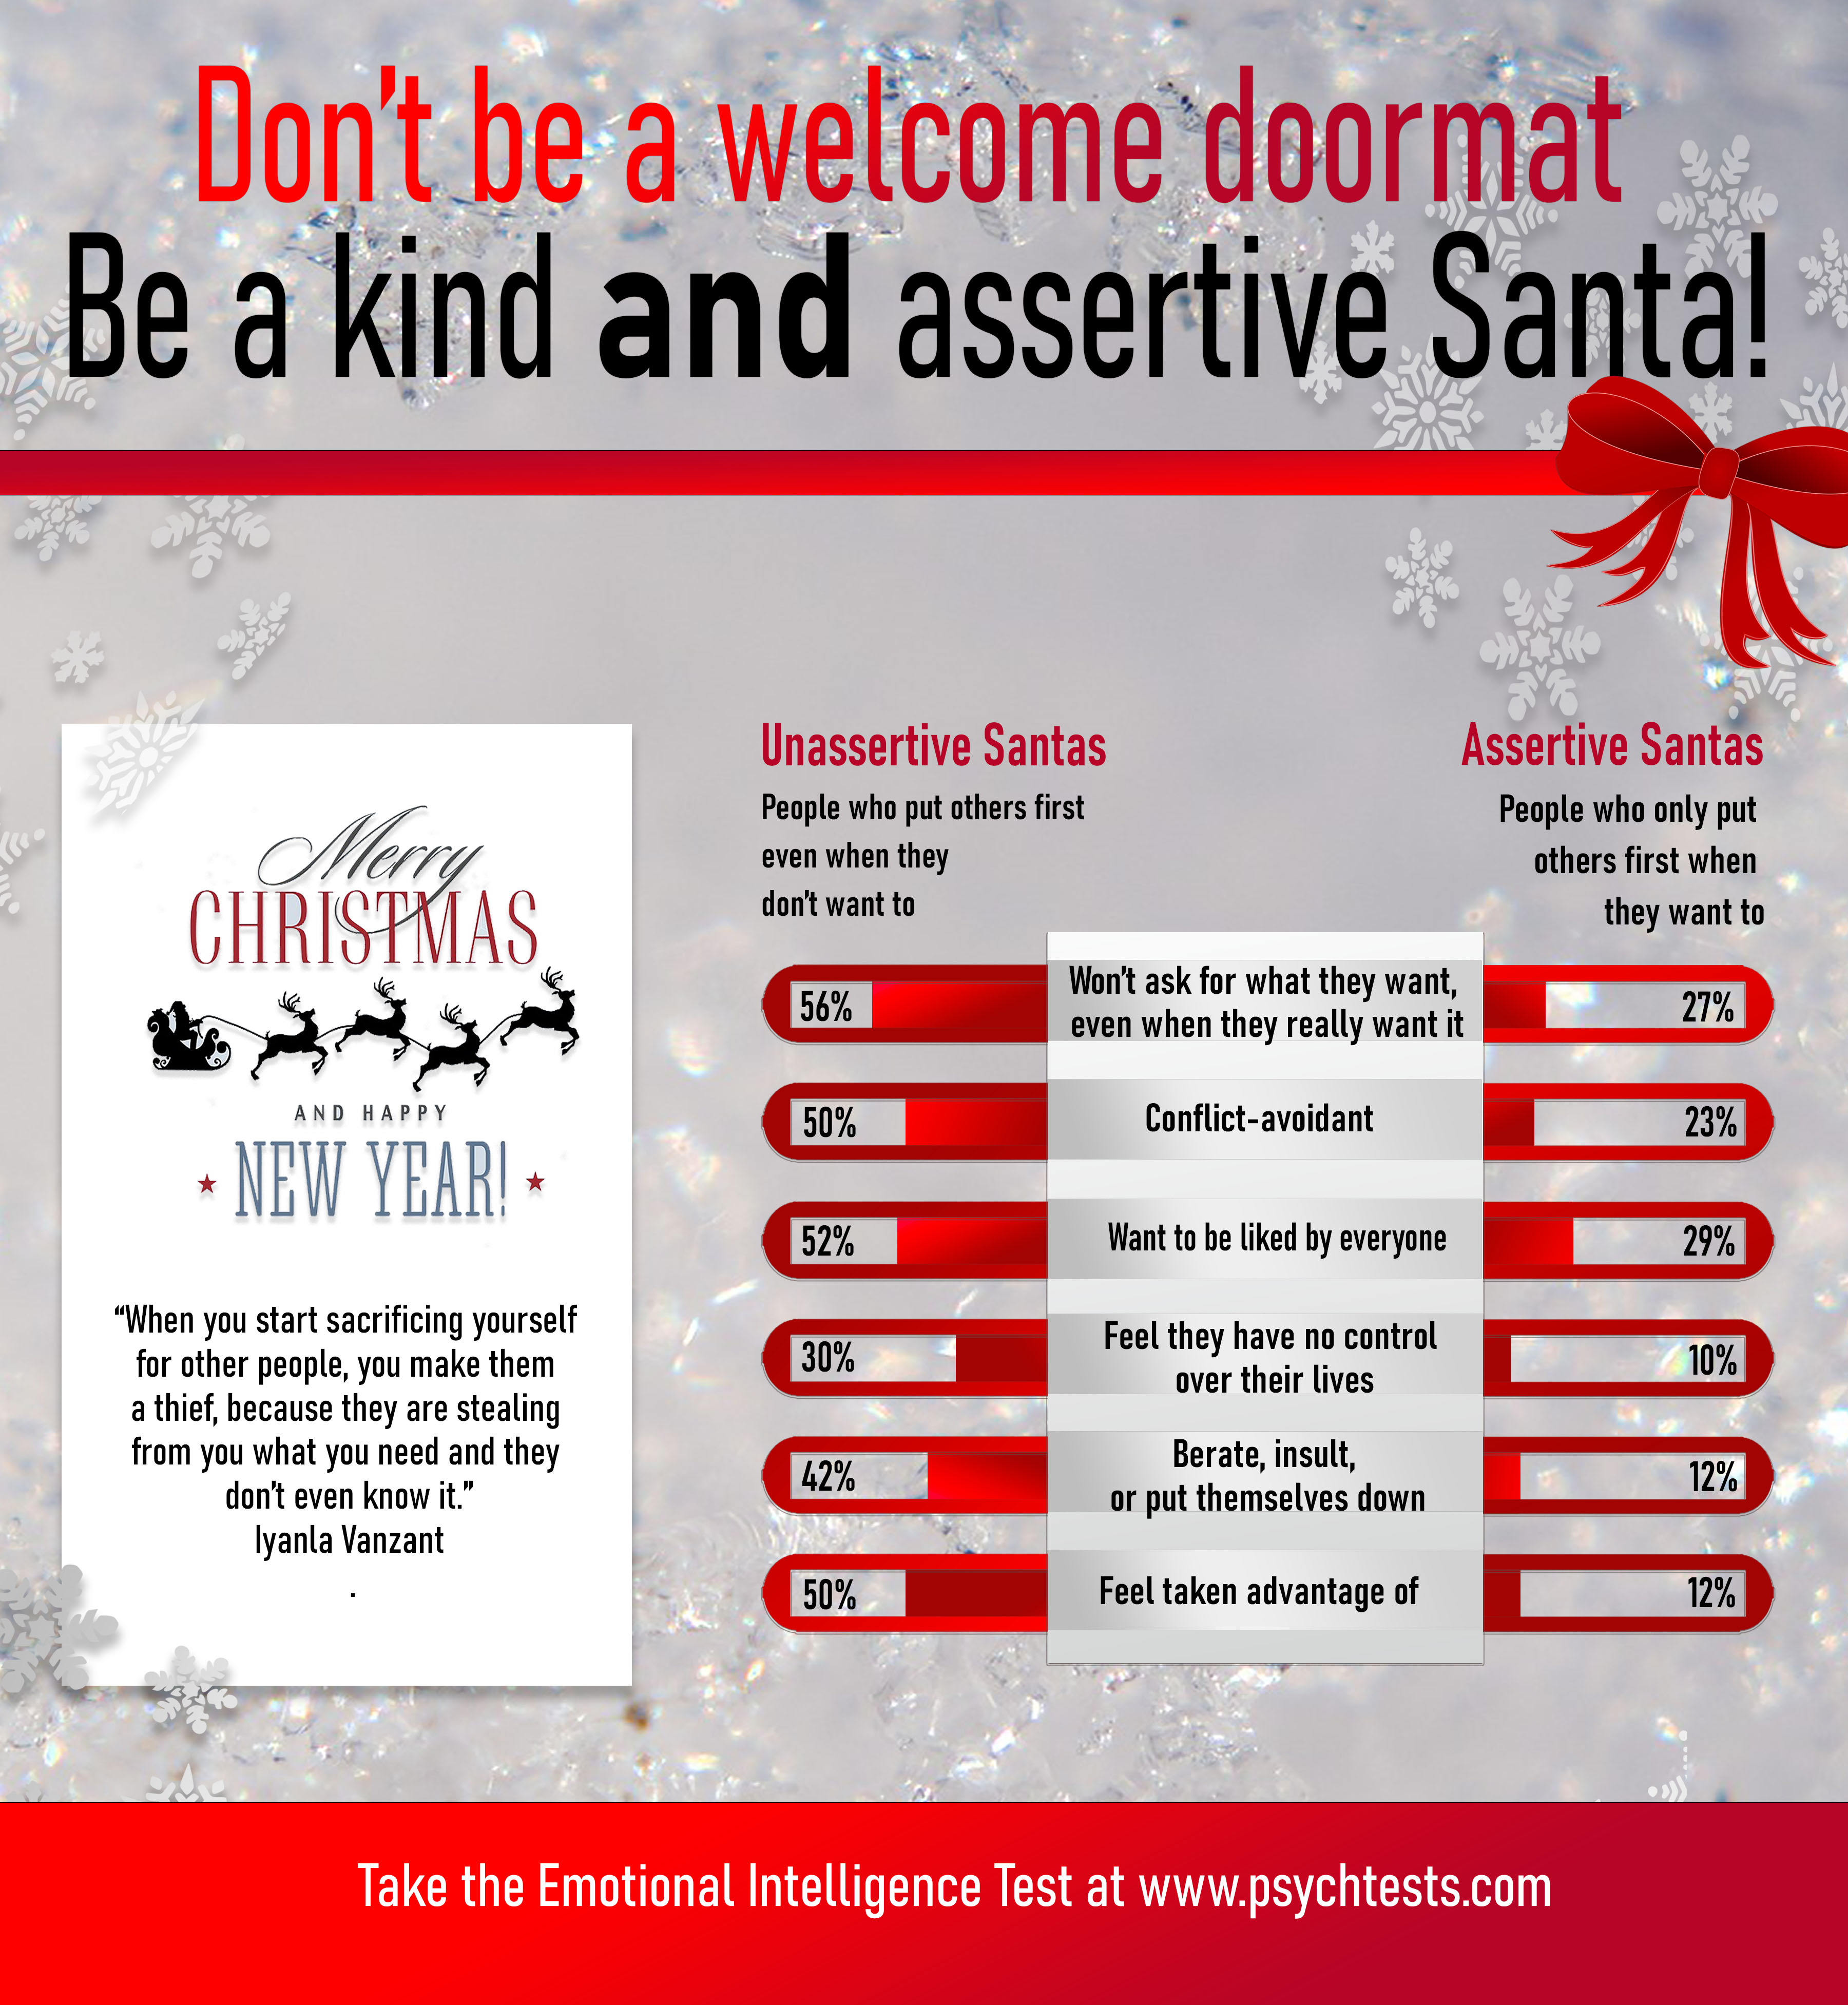 Being assertive and saying “no” is sometimes necessary, even during the holidays.